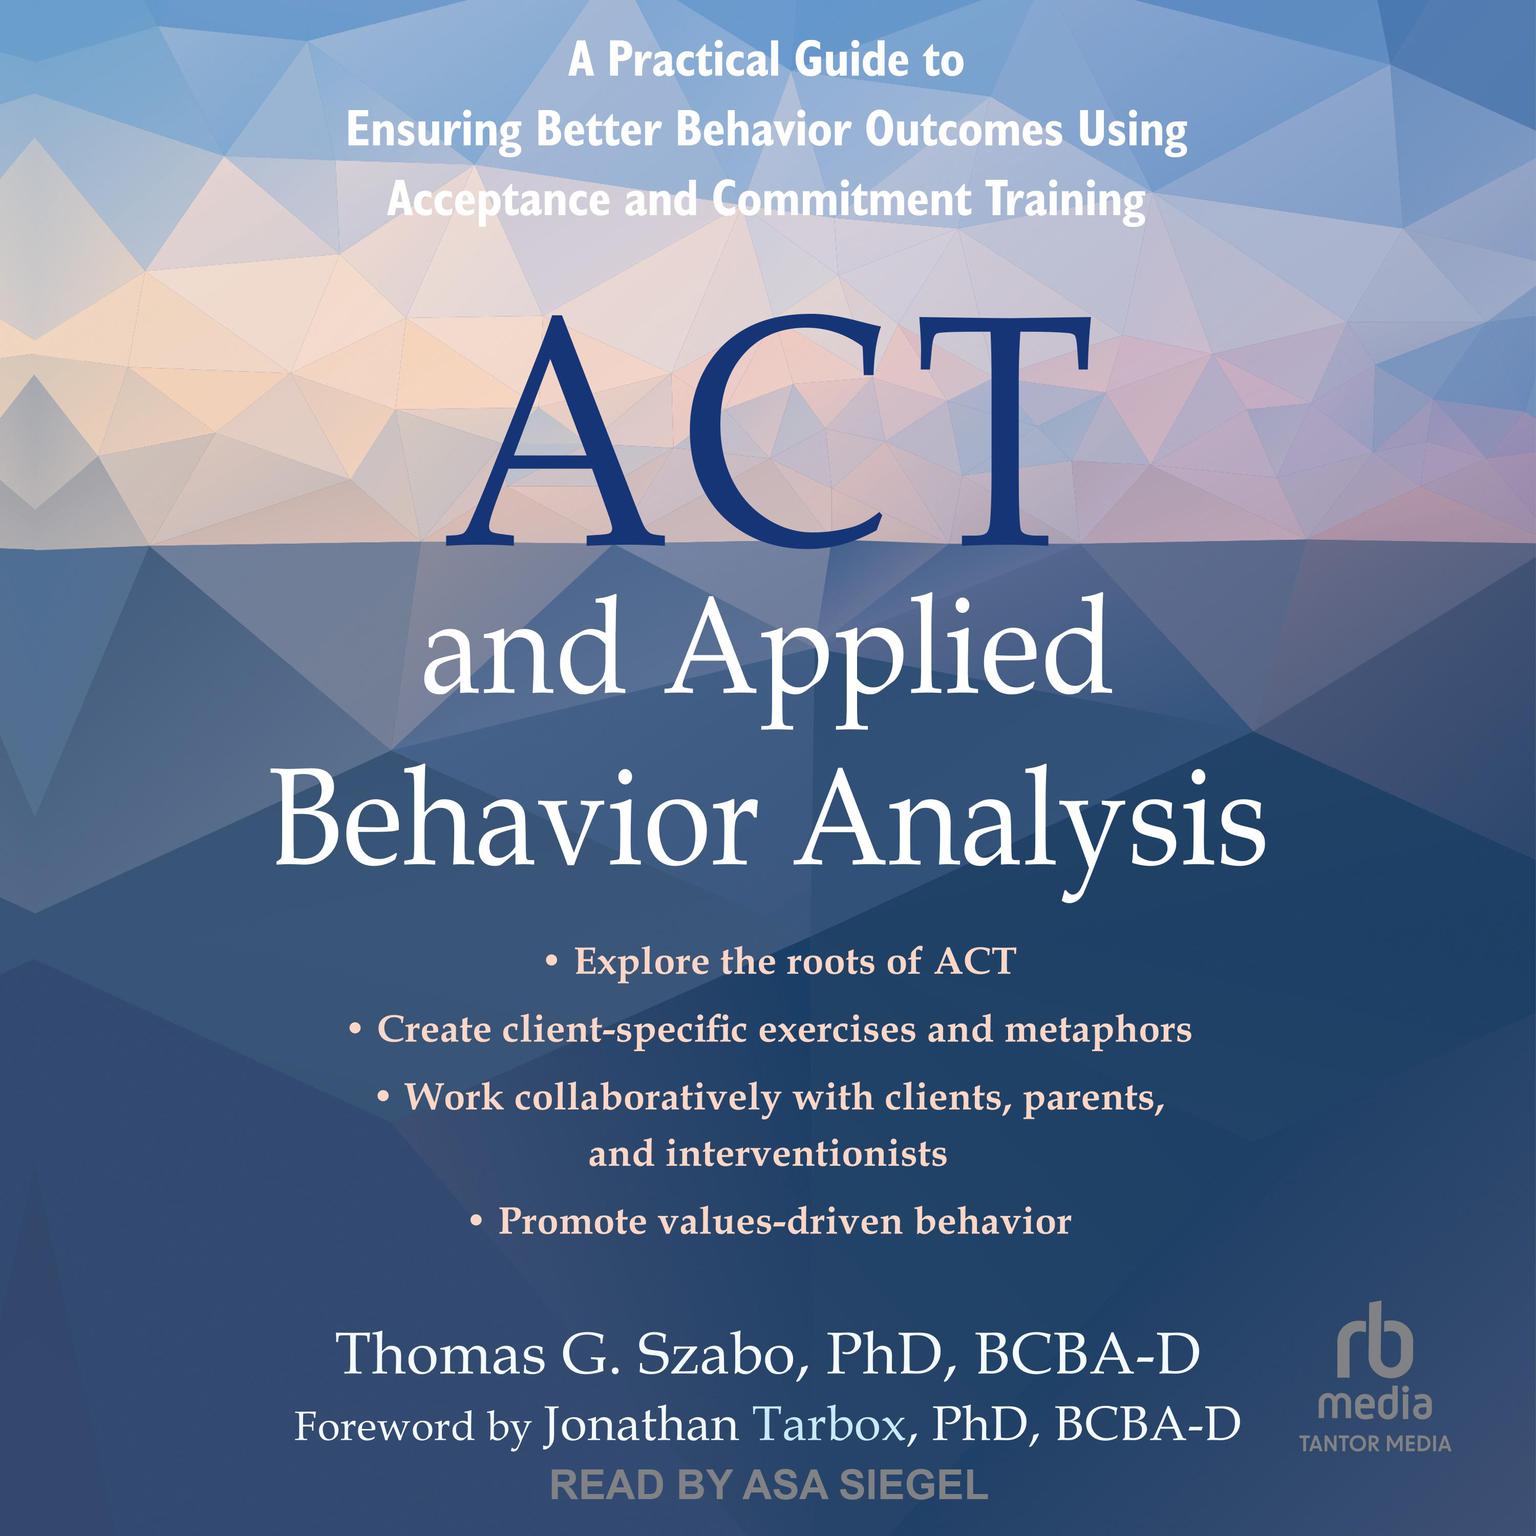 ACT and Applied Behavior Analysis: A Practical Guide to Ensuring Better Behavior Outcomes Using Acceptance and Commitment Training Audiobook, by Thomas G. Szabo, PhD, BCBA-D